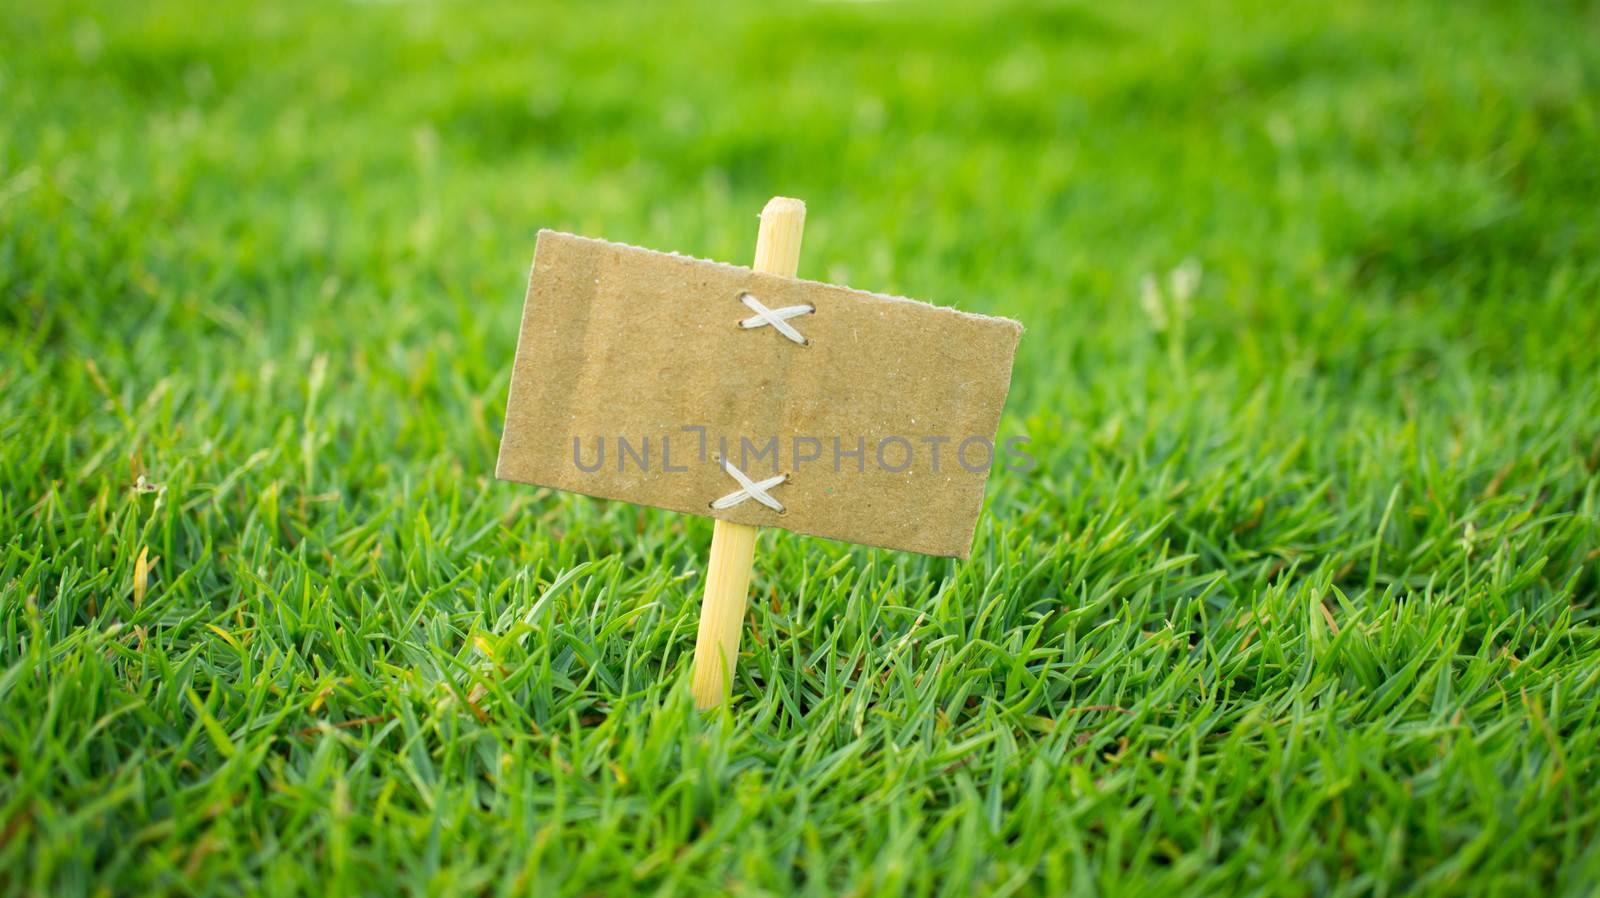 A miniature for sale sign on green grass